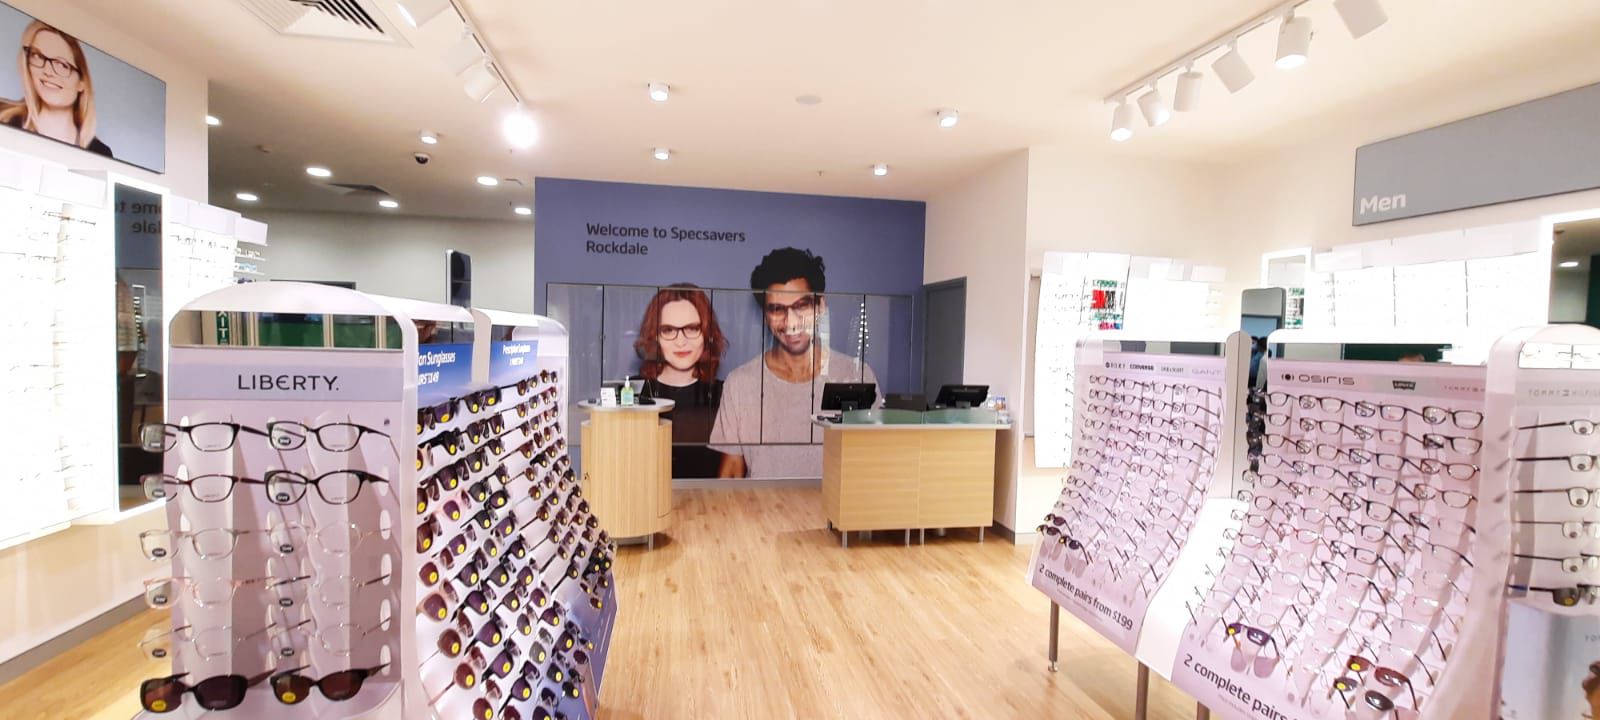 Images Specsavers Optometrists & Audiology - Rockdale